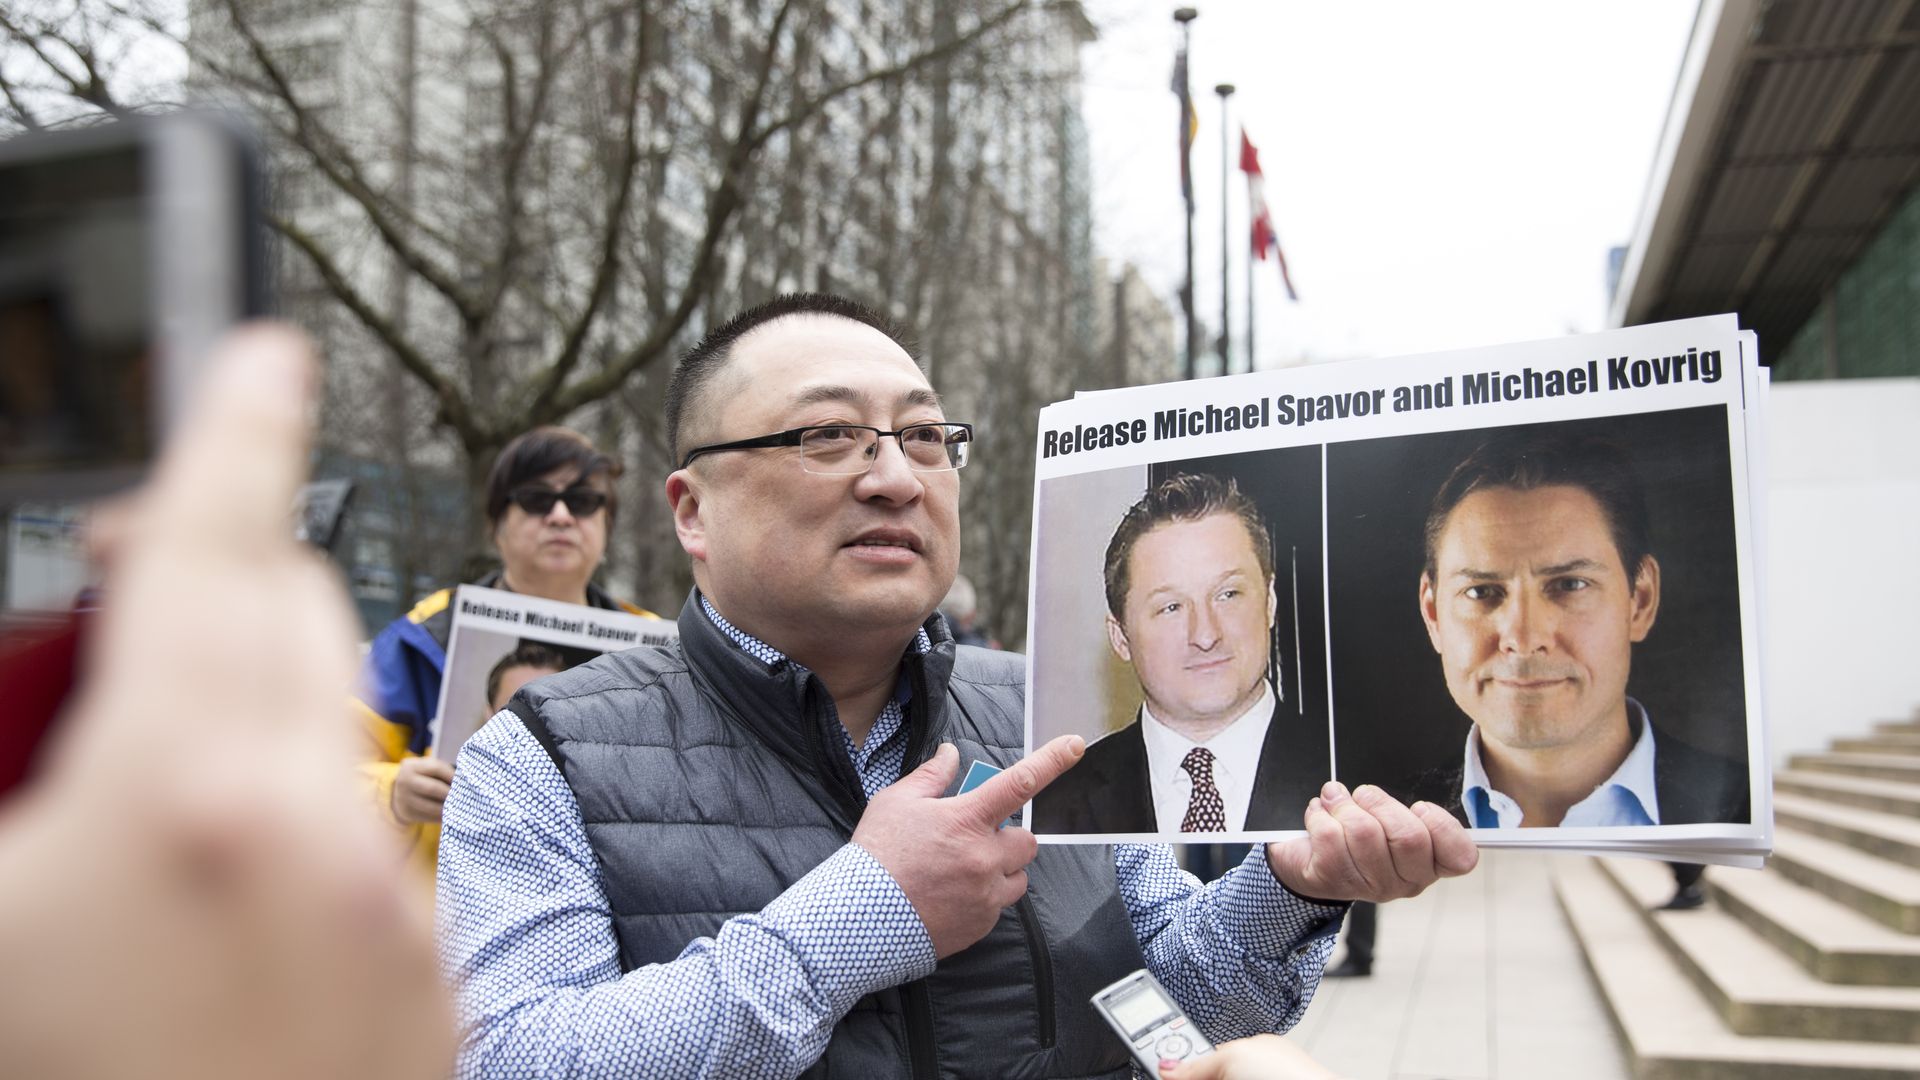  Louis Huang of Vancouver Freedom and Democracy for China holds photos of Canadians Michael Spavor and Michael Kovrig.